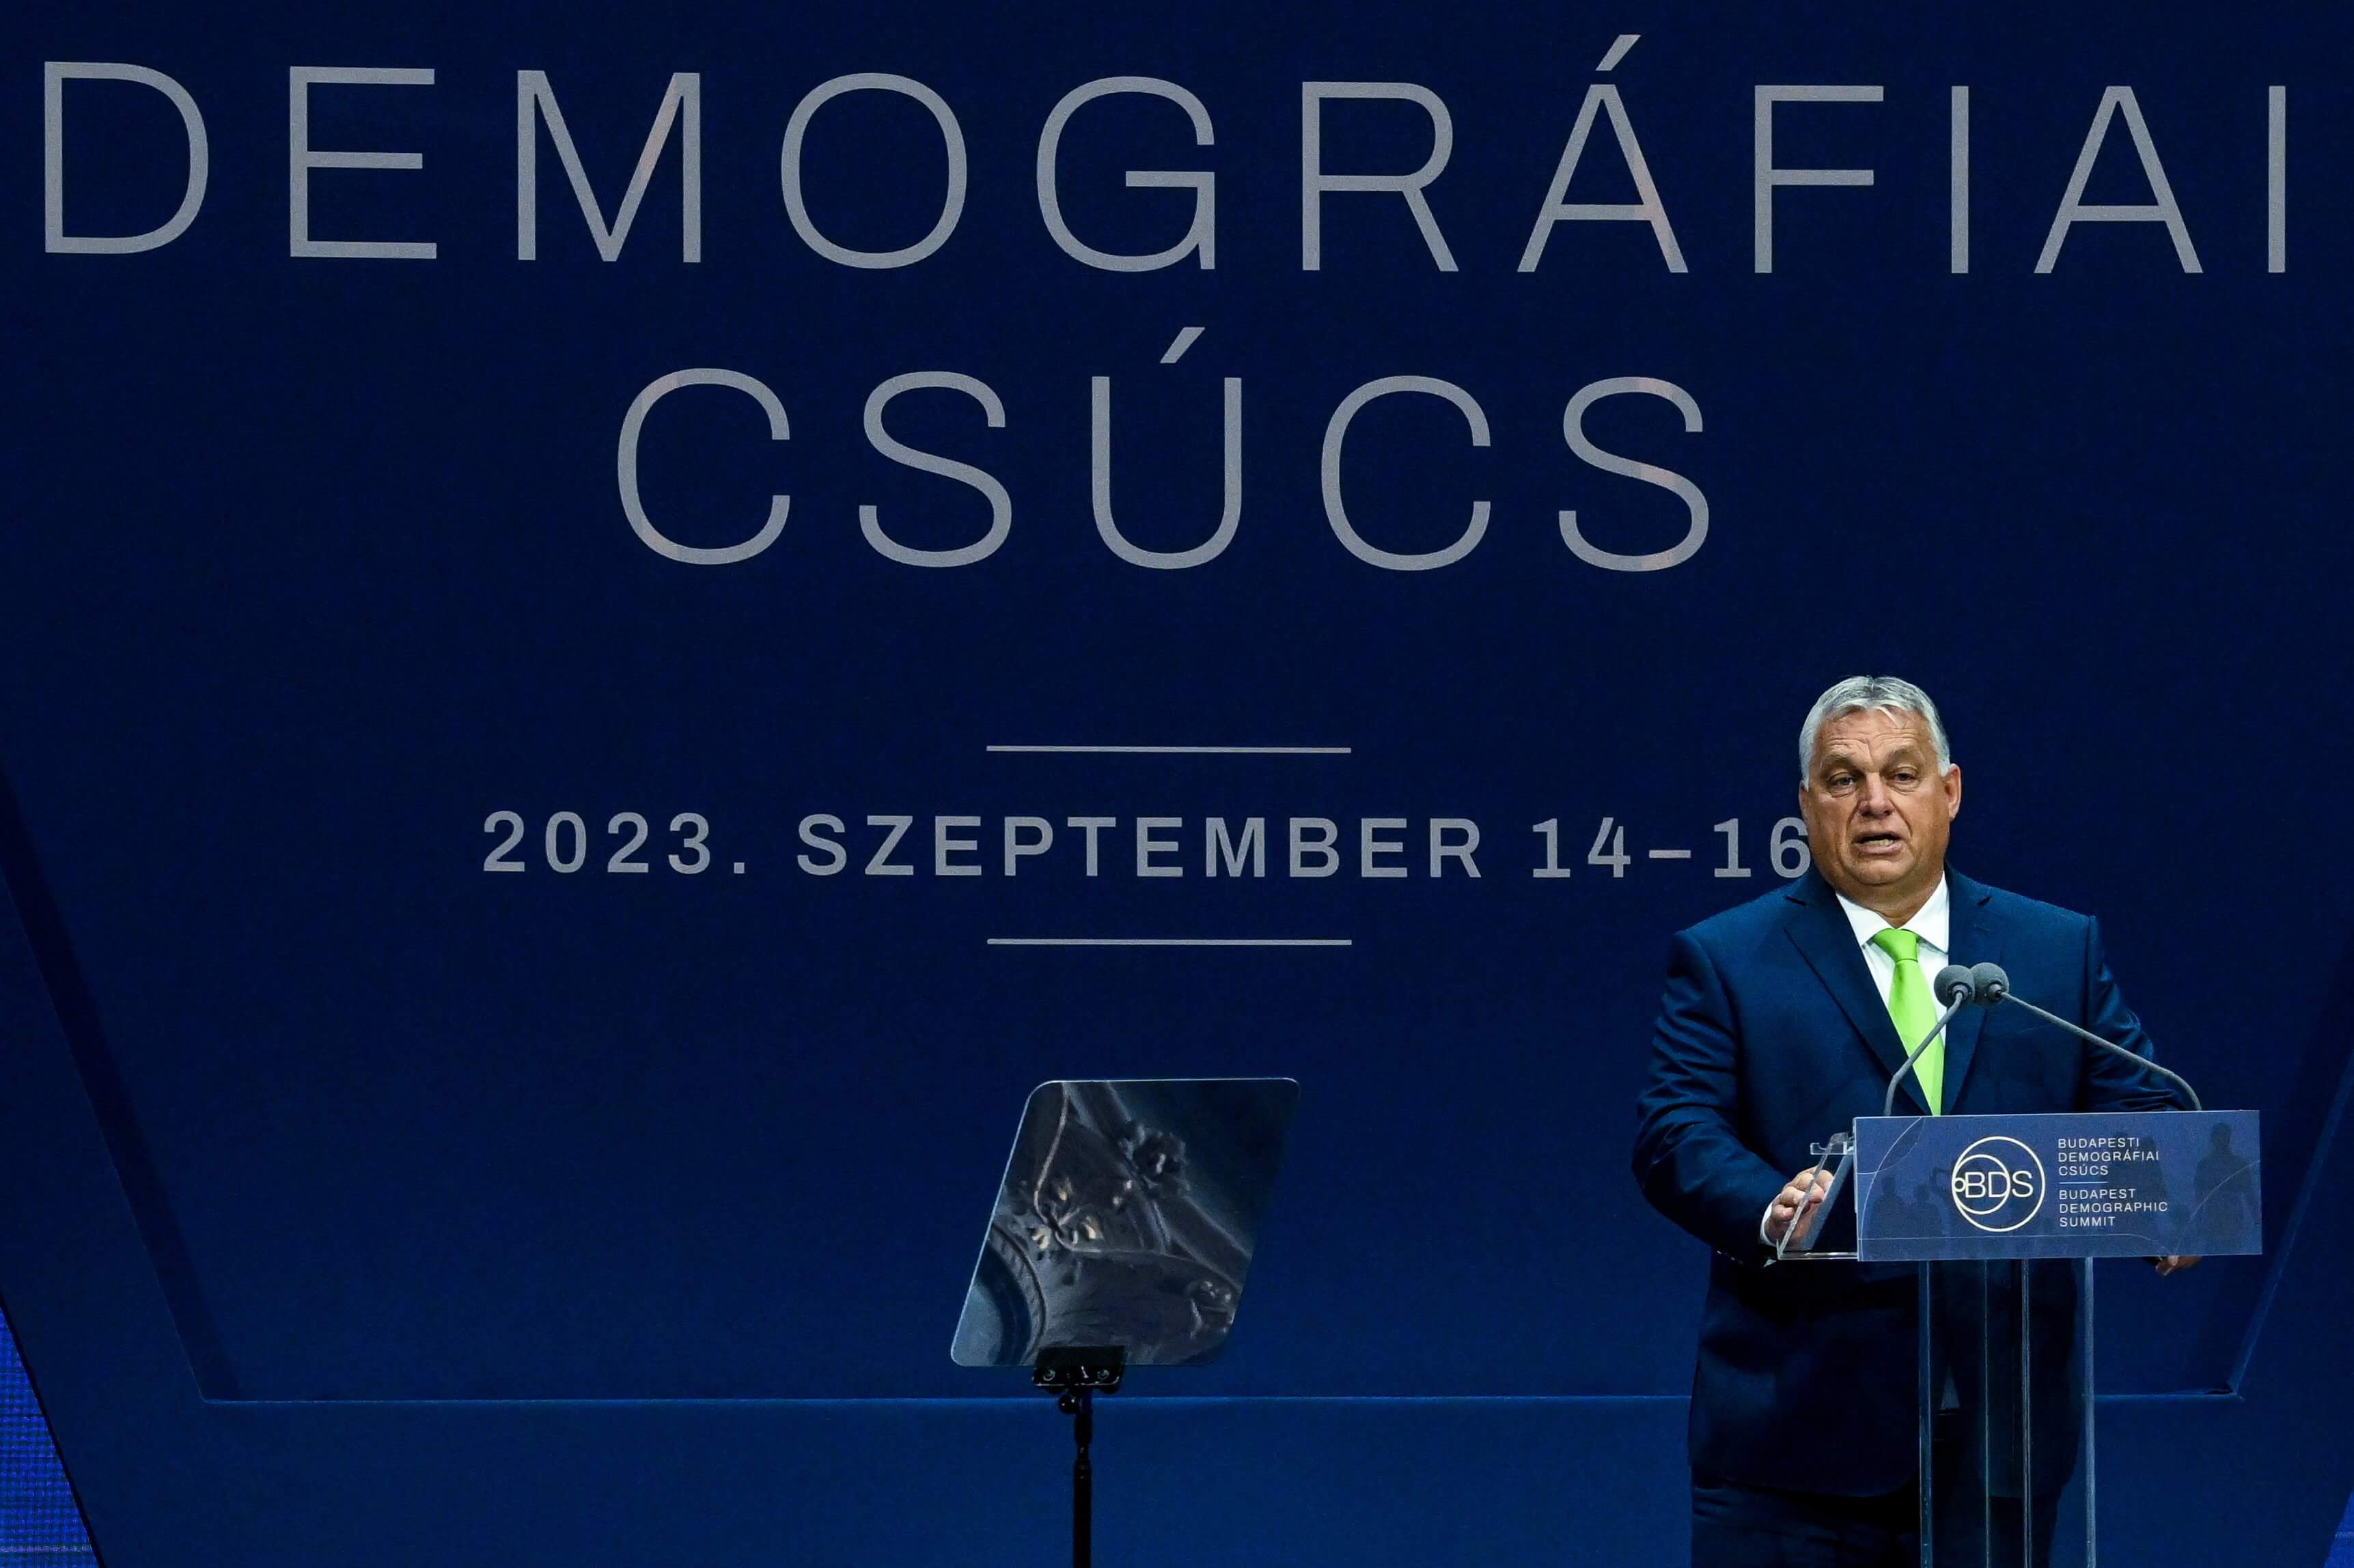 Family Policy 2.0 is Coming in Hungary, Orbán Announced at 5th Budapest Demographic Summit